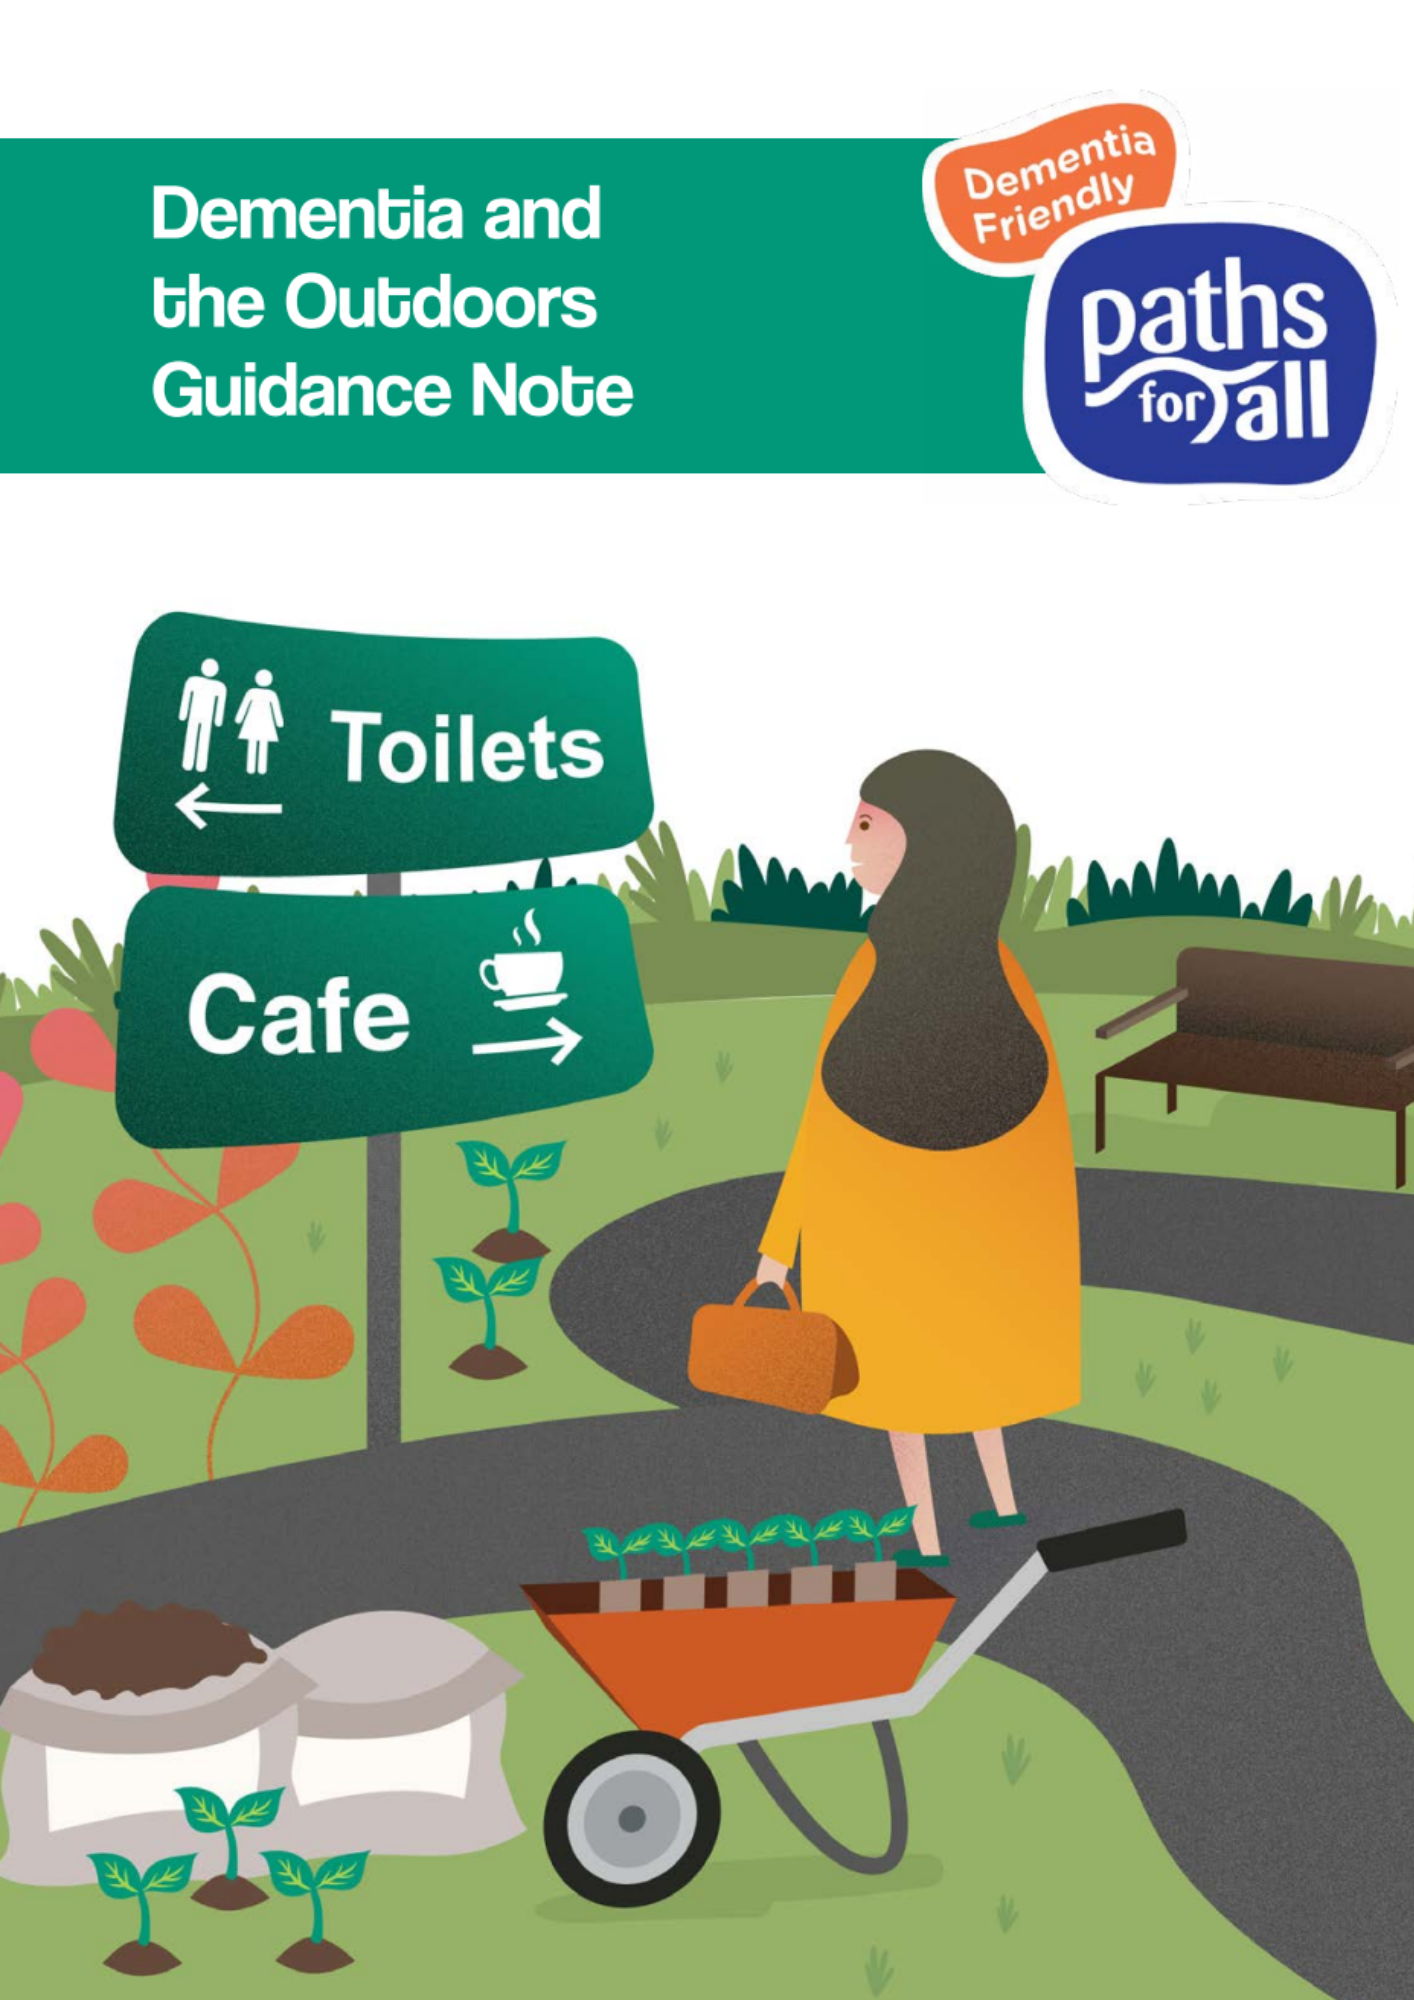 An illustrative graphic showing an individual consulting a dementia friendly sign on a path.